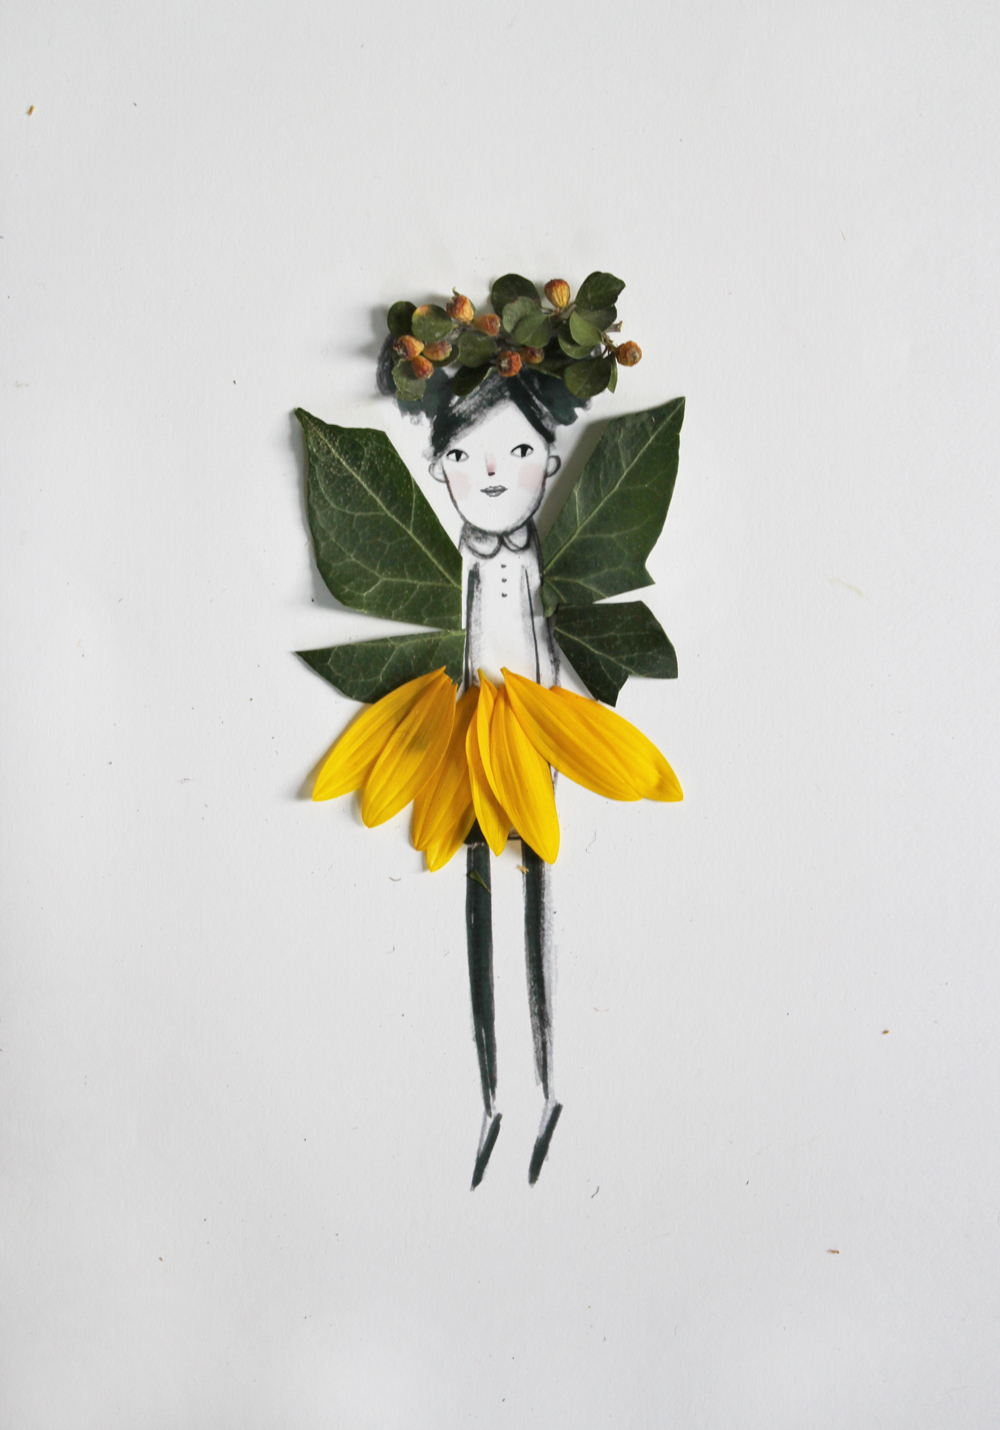 Nature Paper Dolls by Mer Mag. Come be charmed by these Sweet Spring Crafts & Finds to Welcome the Season!